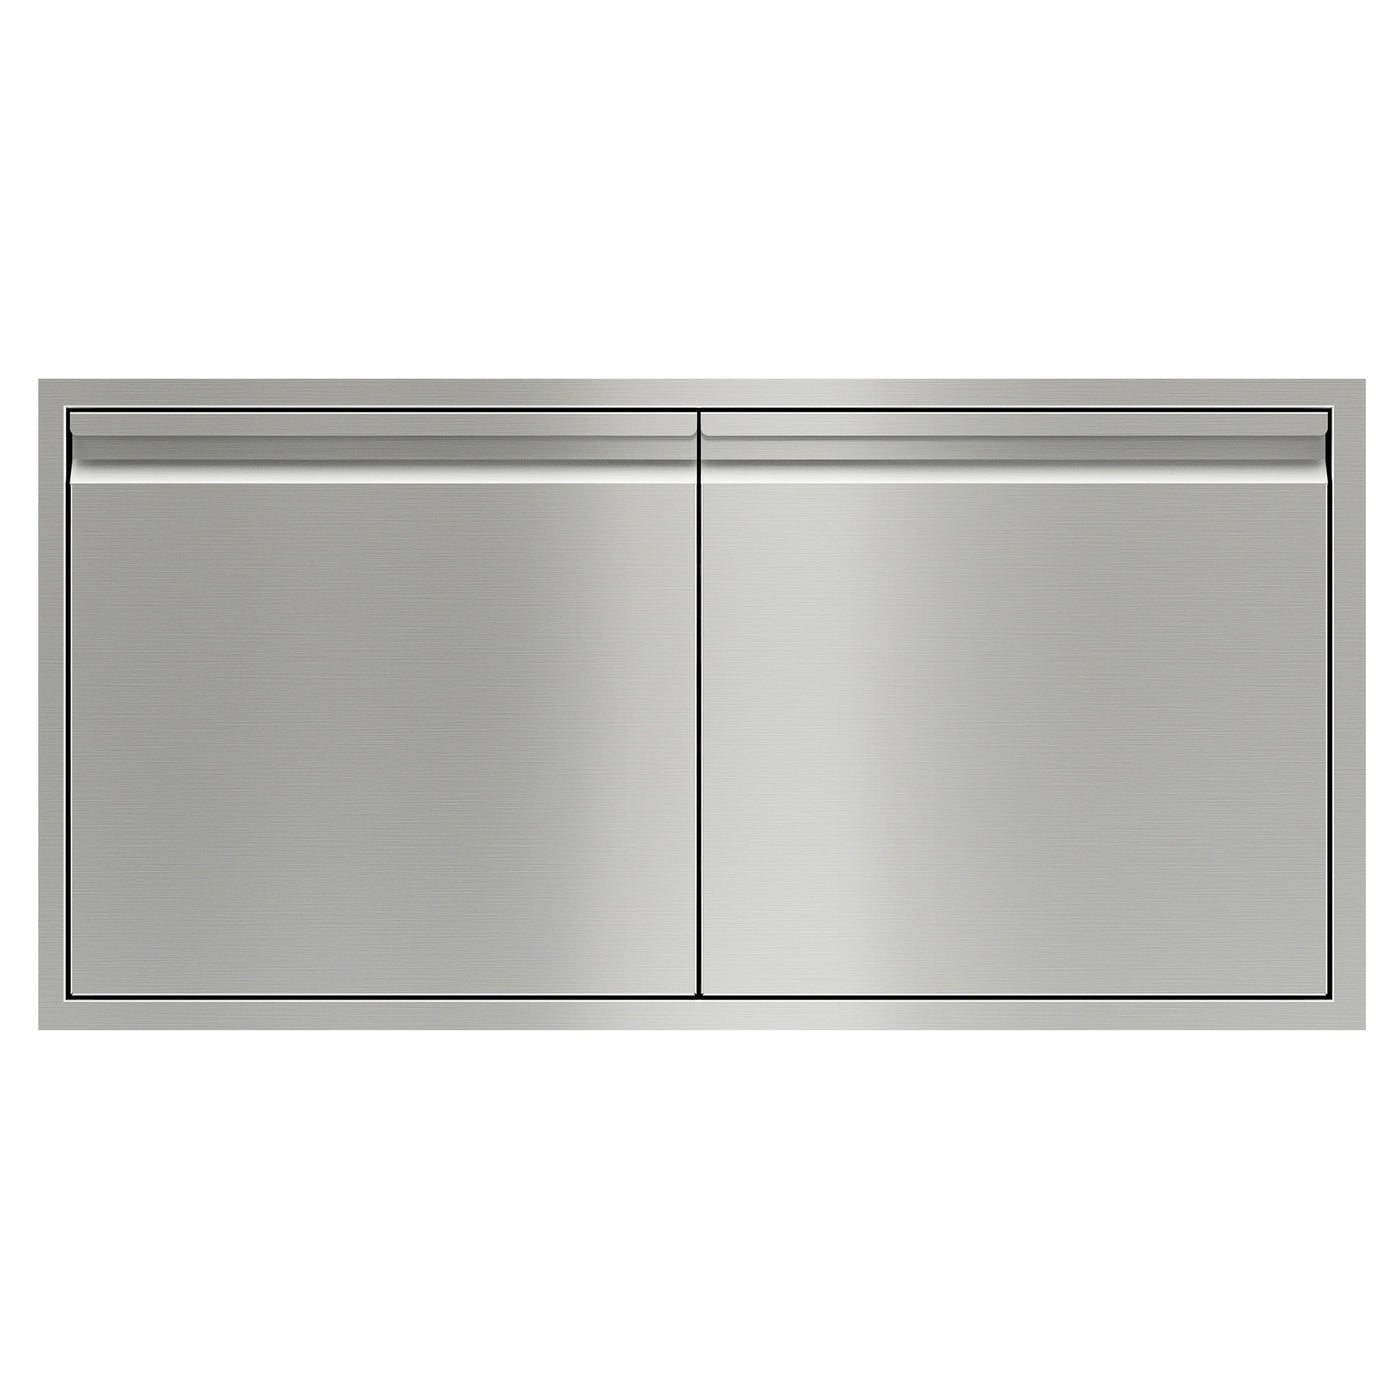 42" Double Access Doors, Stainless Steel